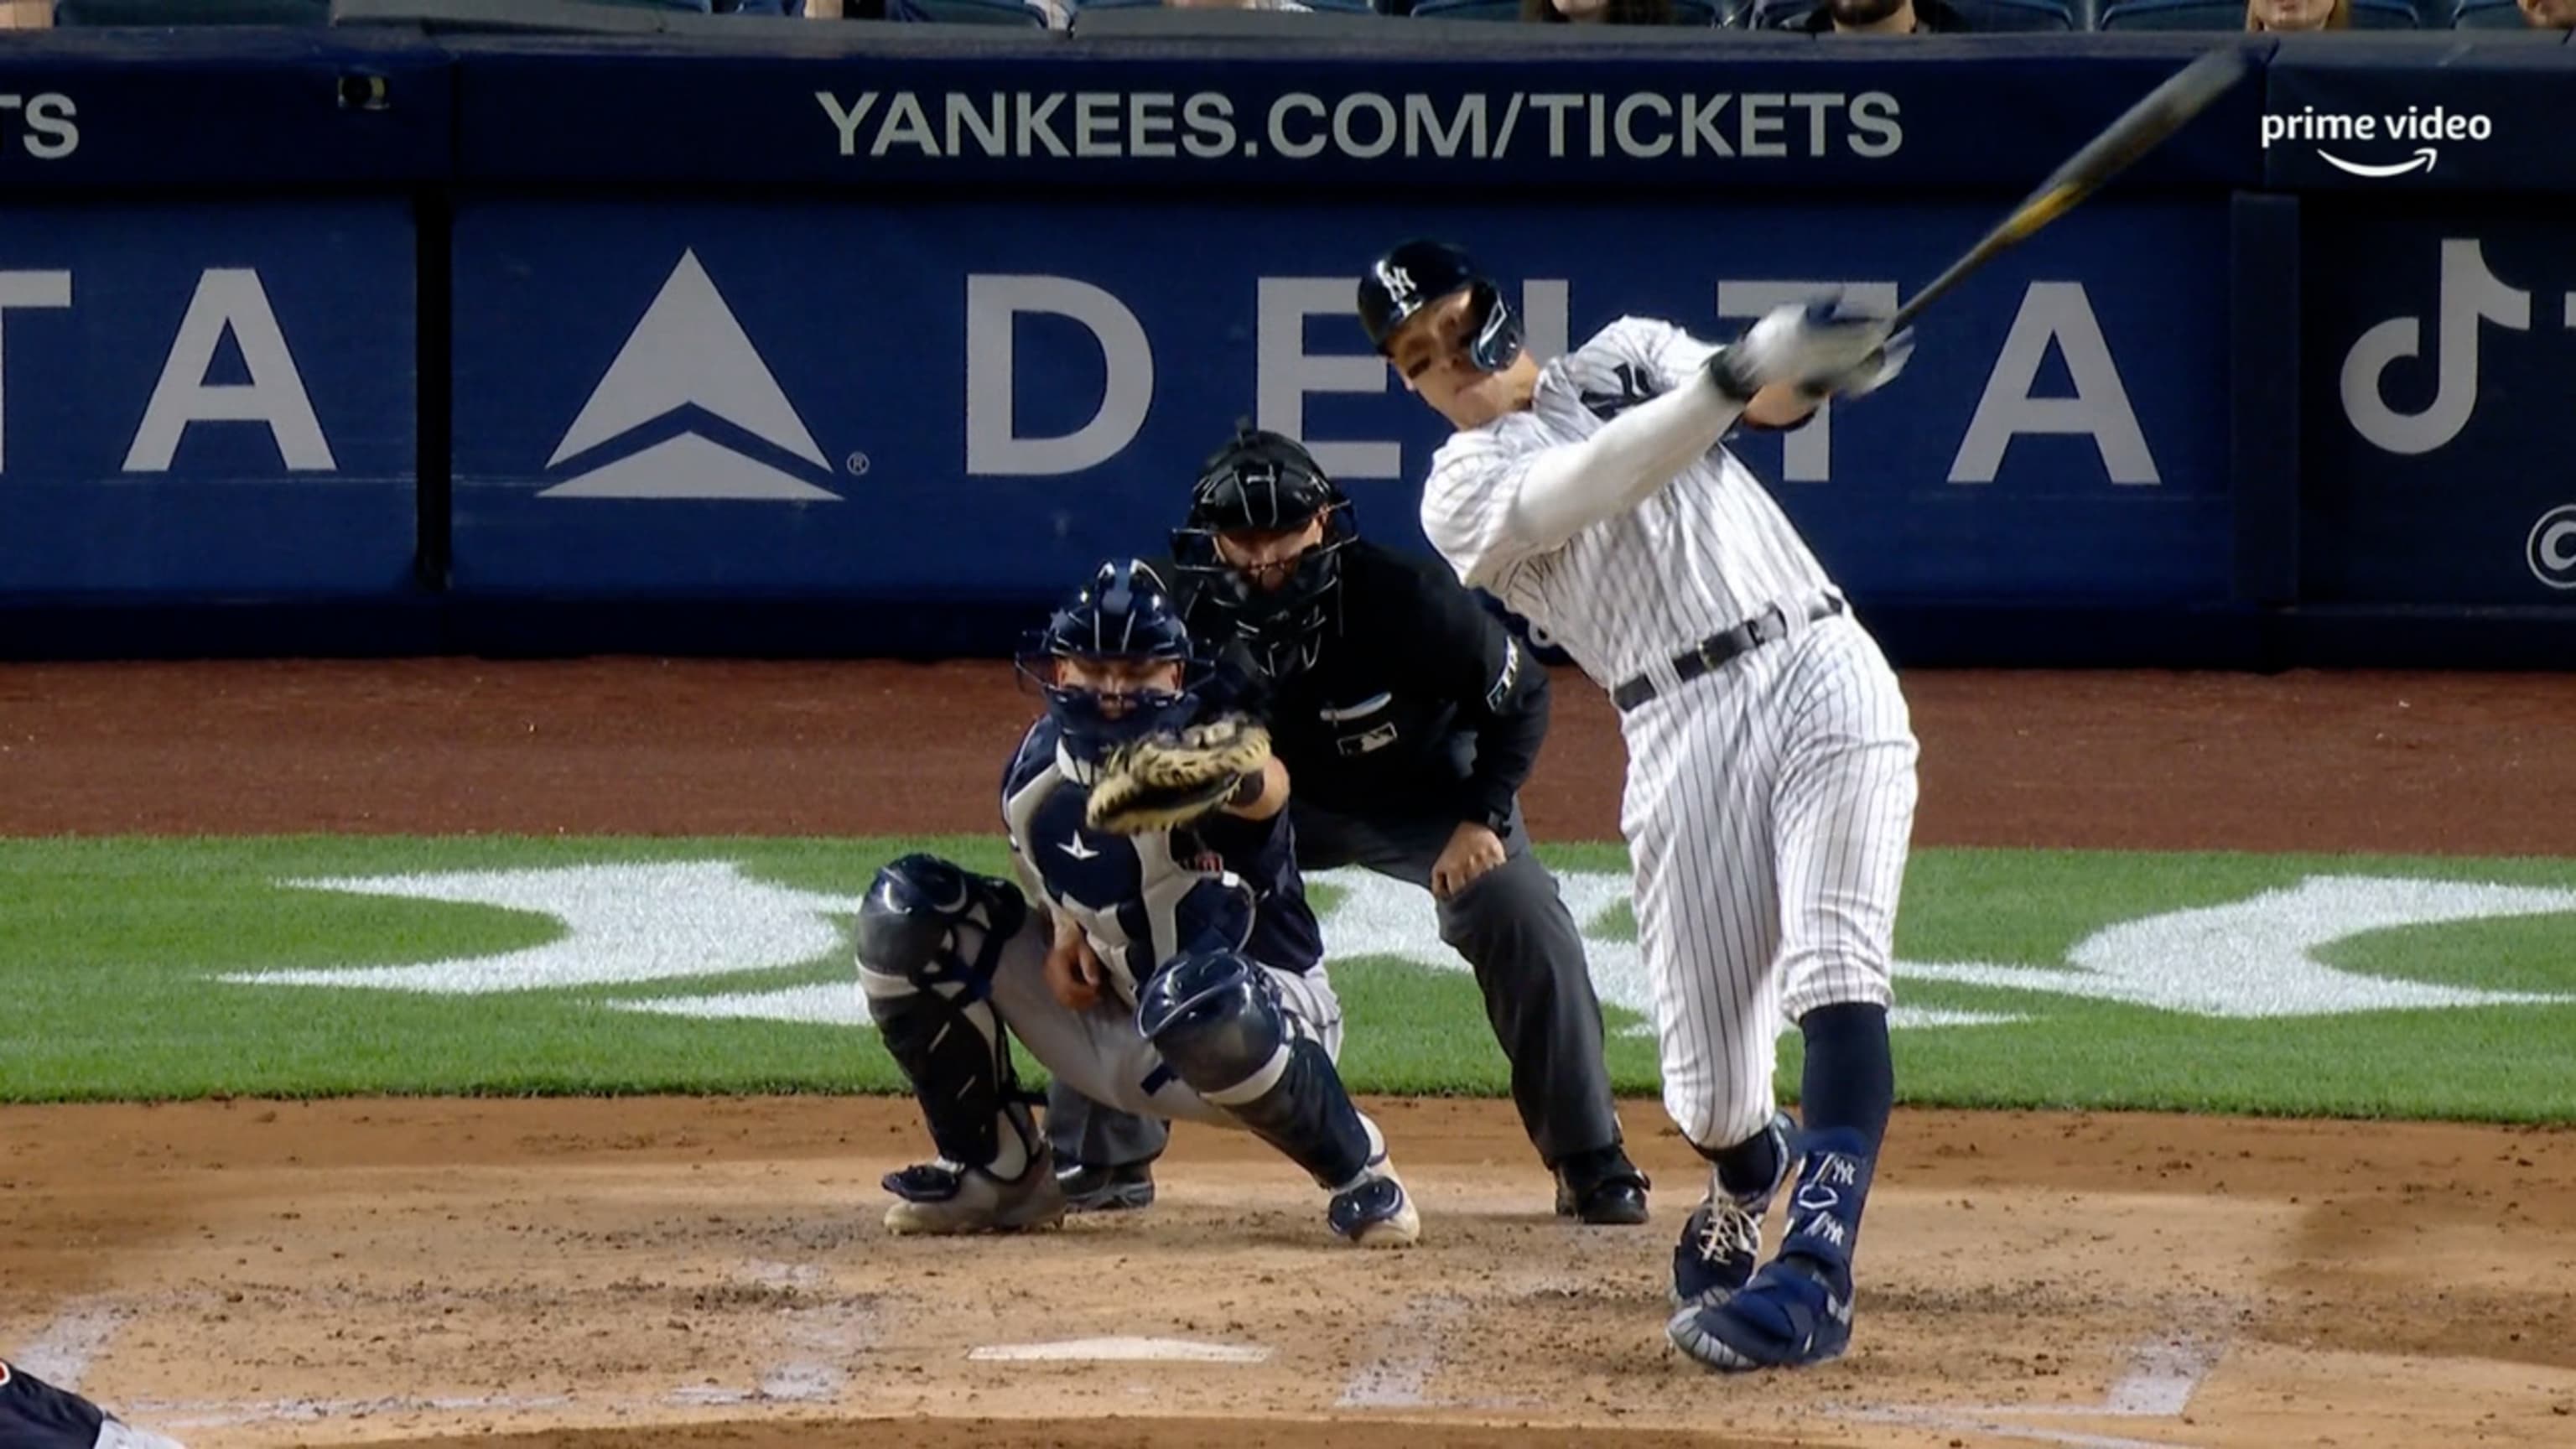 Yankees star Aaron Judge delivers on promise with home run vs. Dodgers